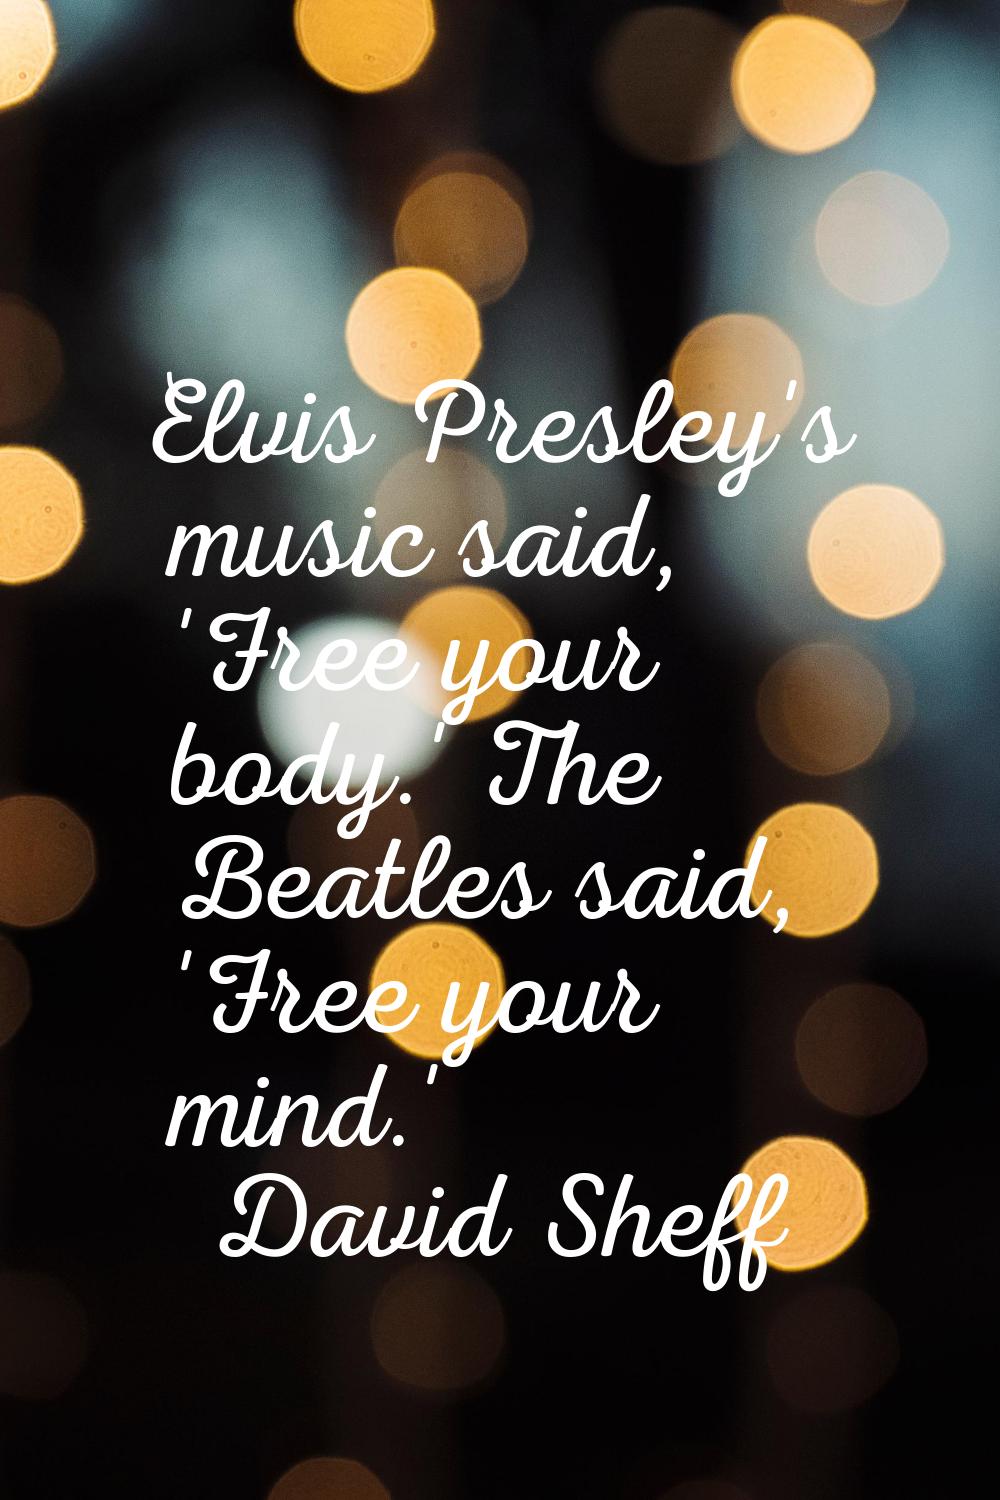 Elvis Presley's music said, 'Free your body.' The Beatles said, 'Free your mind.'